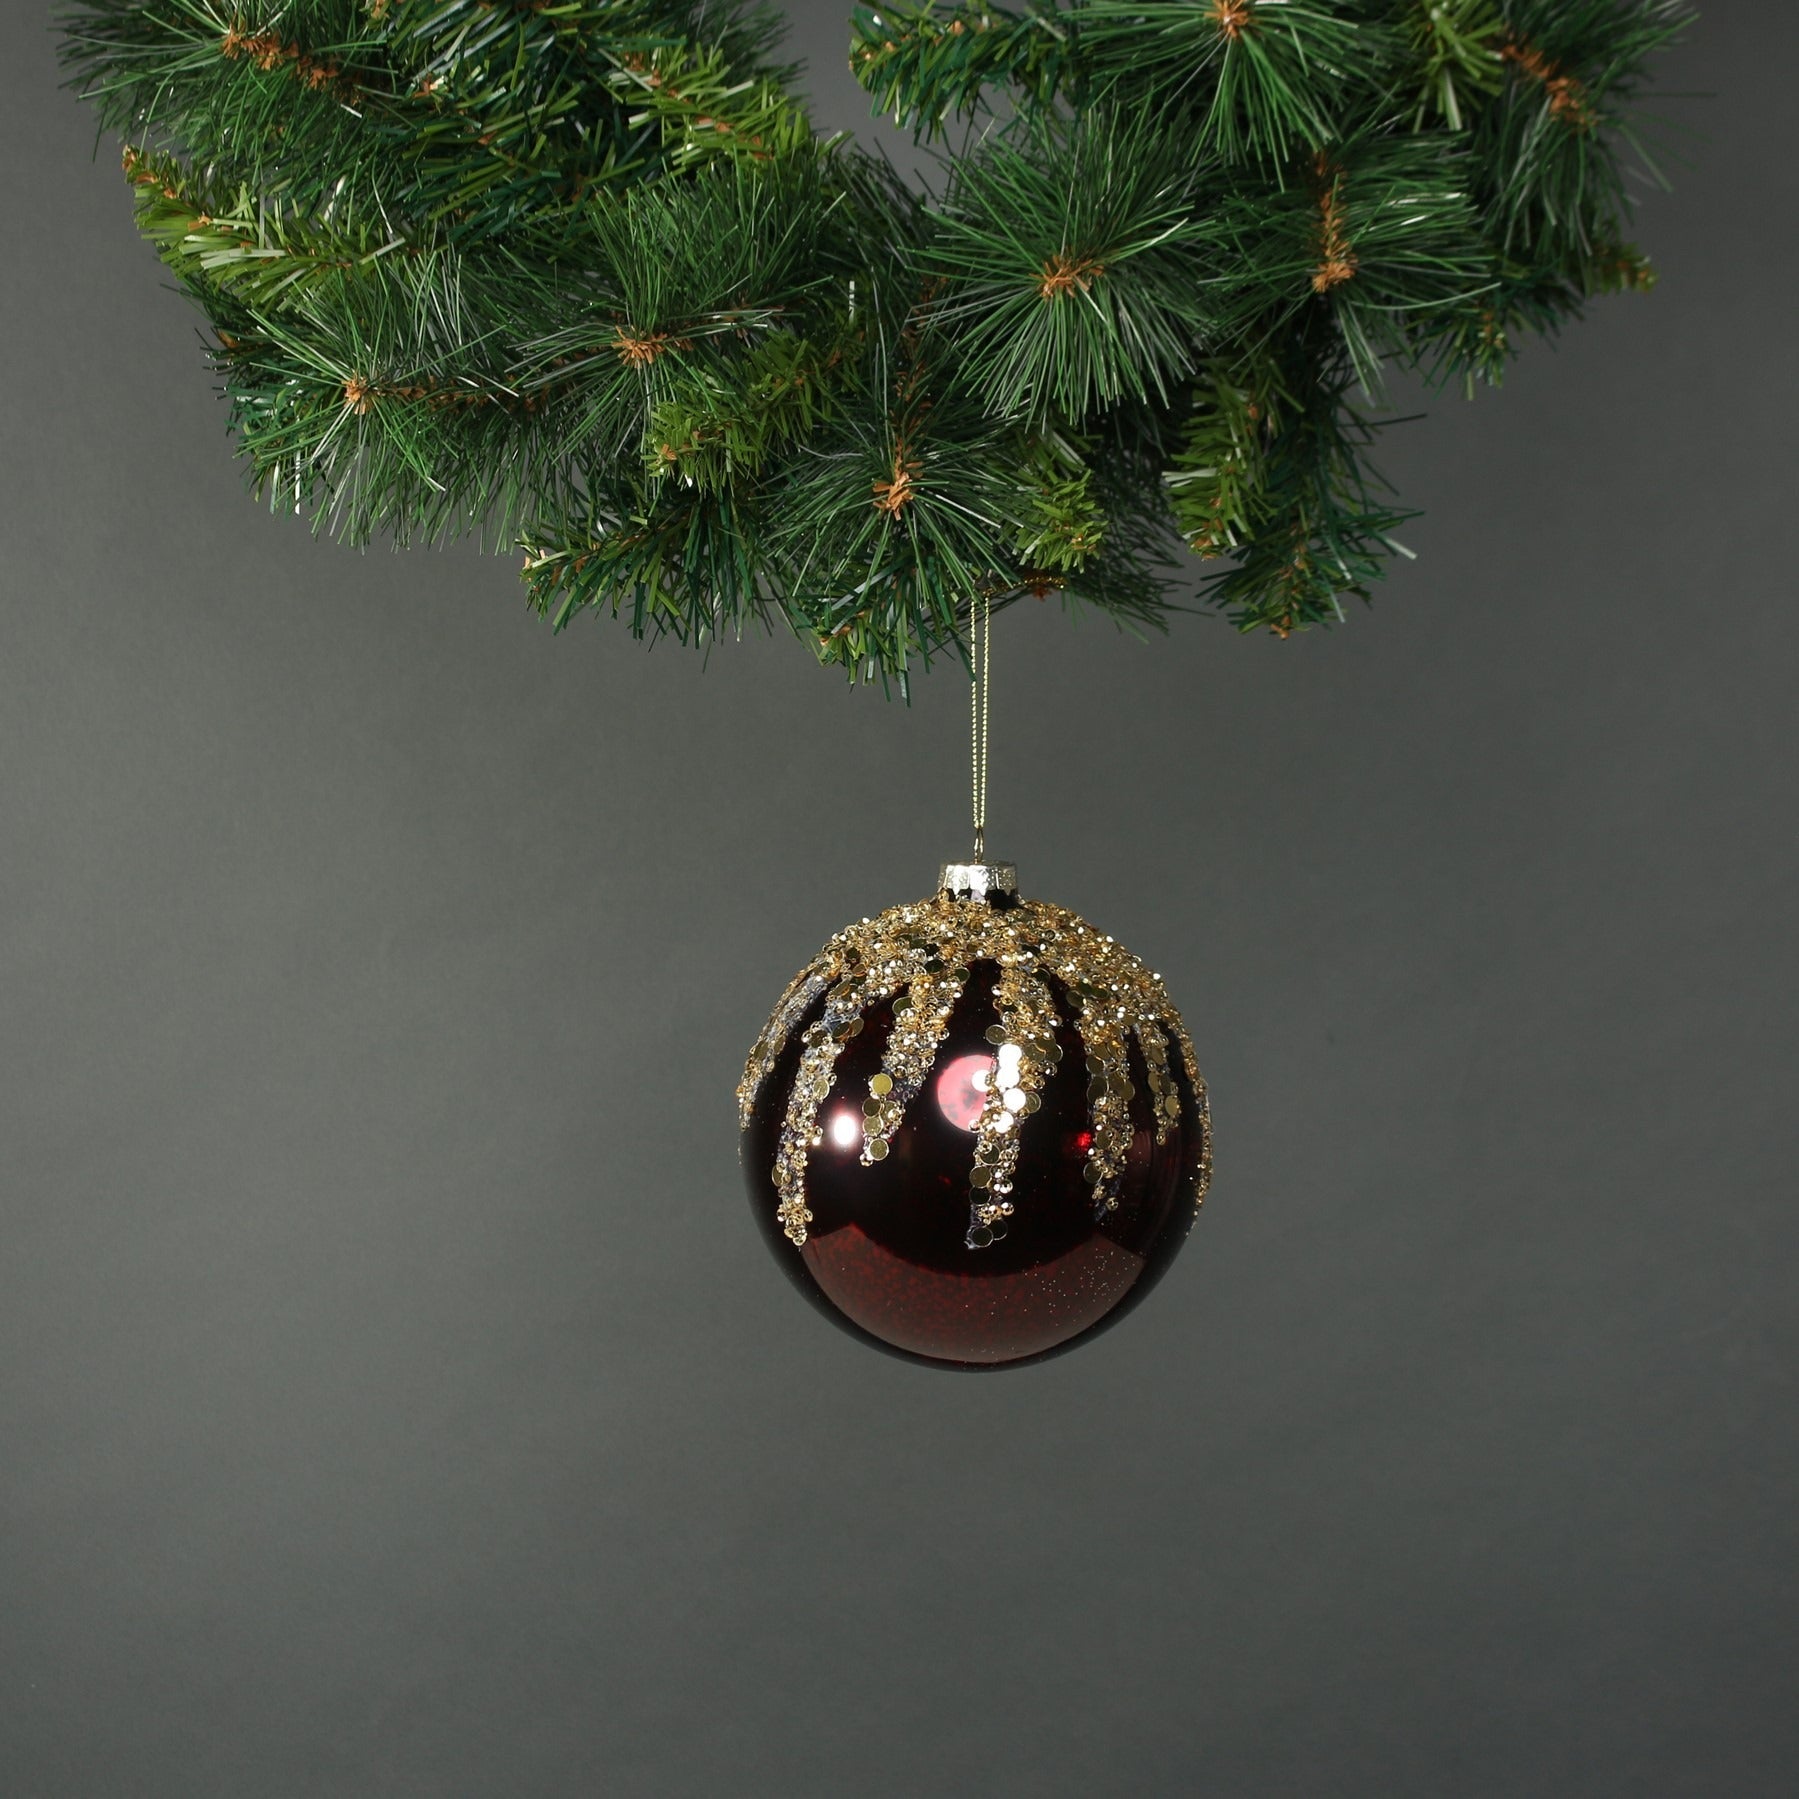 View Zanna 12cm Glass Bauble Set of 2 information